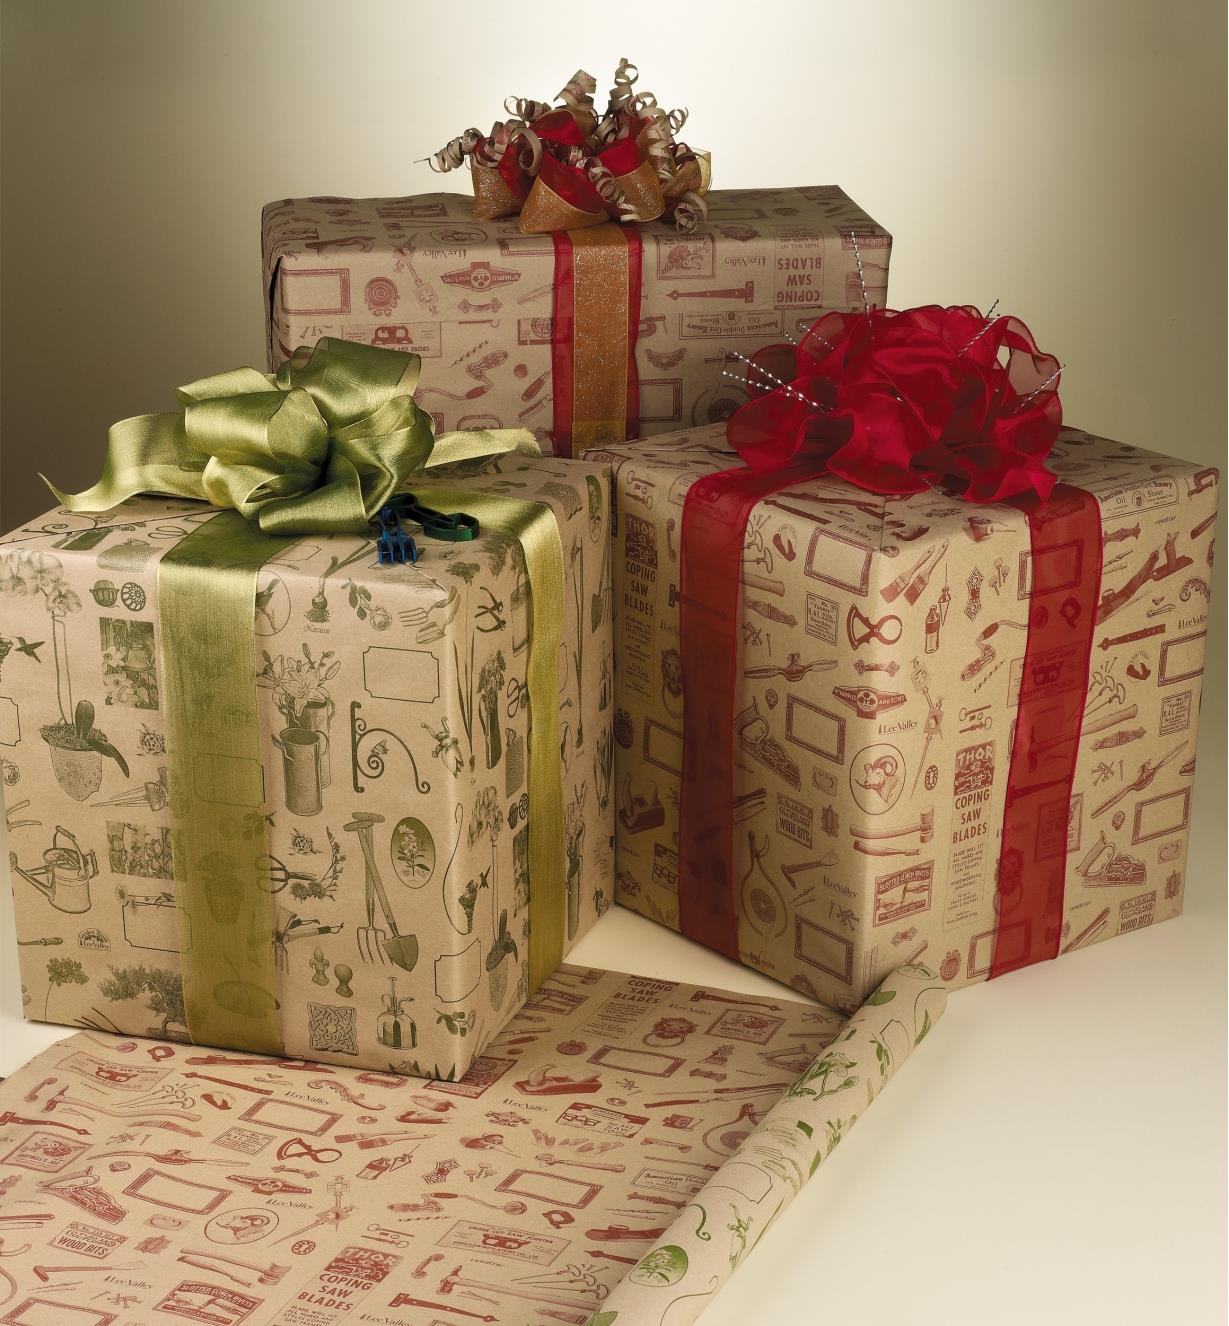 Three presents wrapped in Lee Valley Wrapping Paper with bows